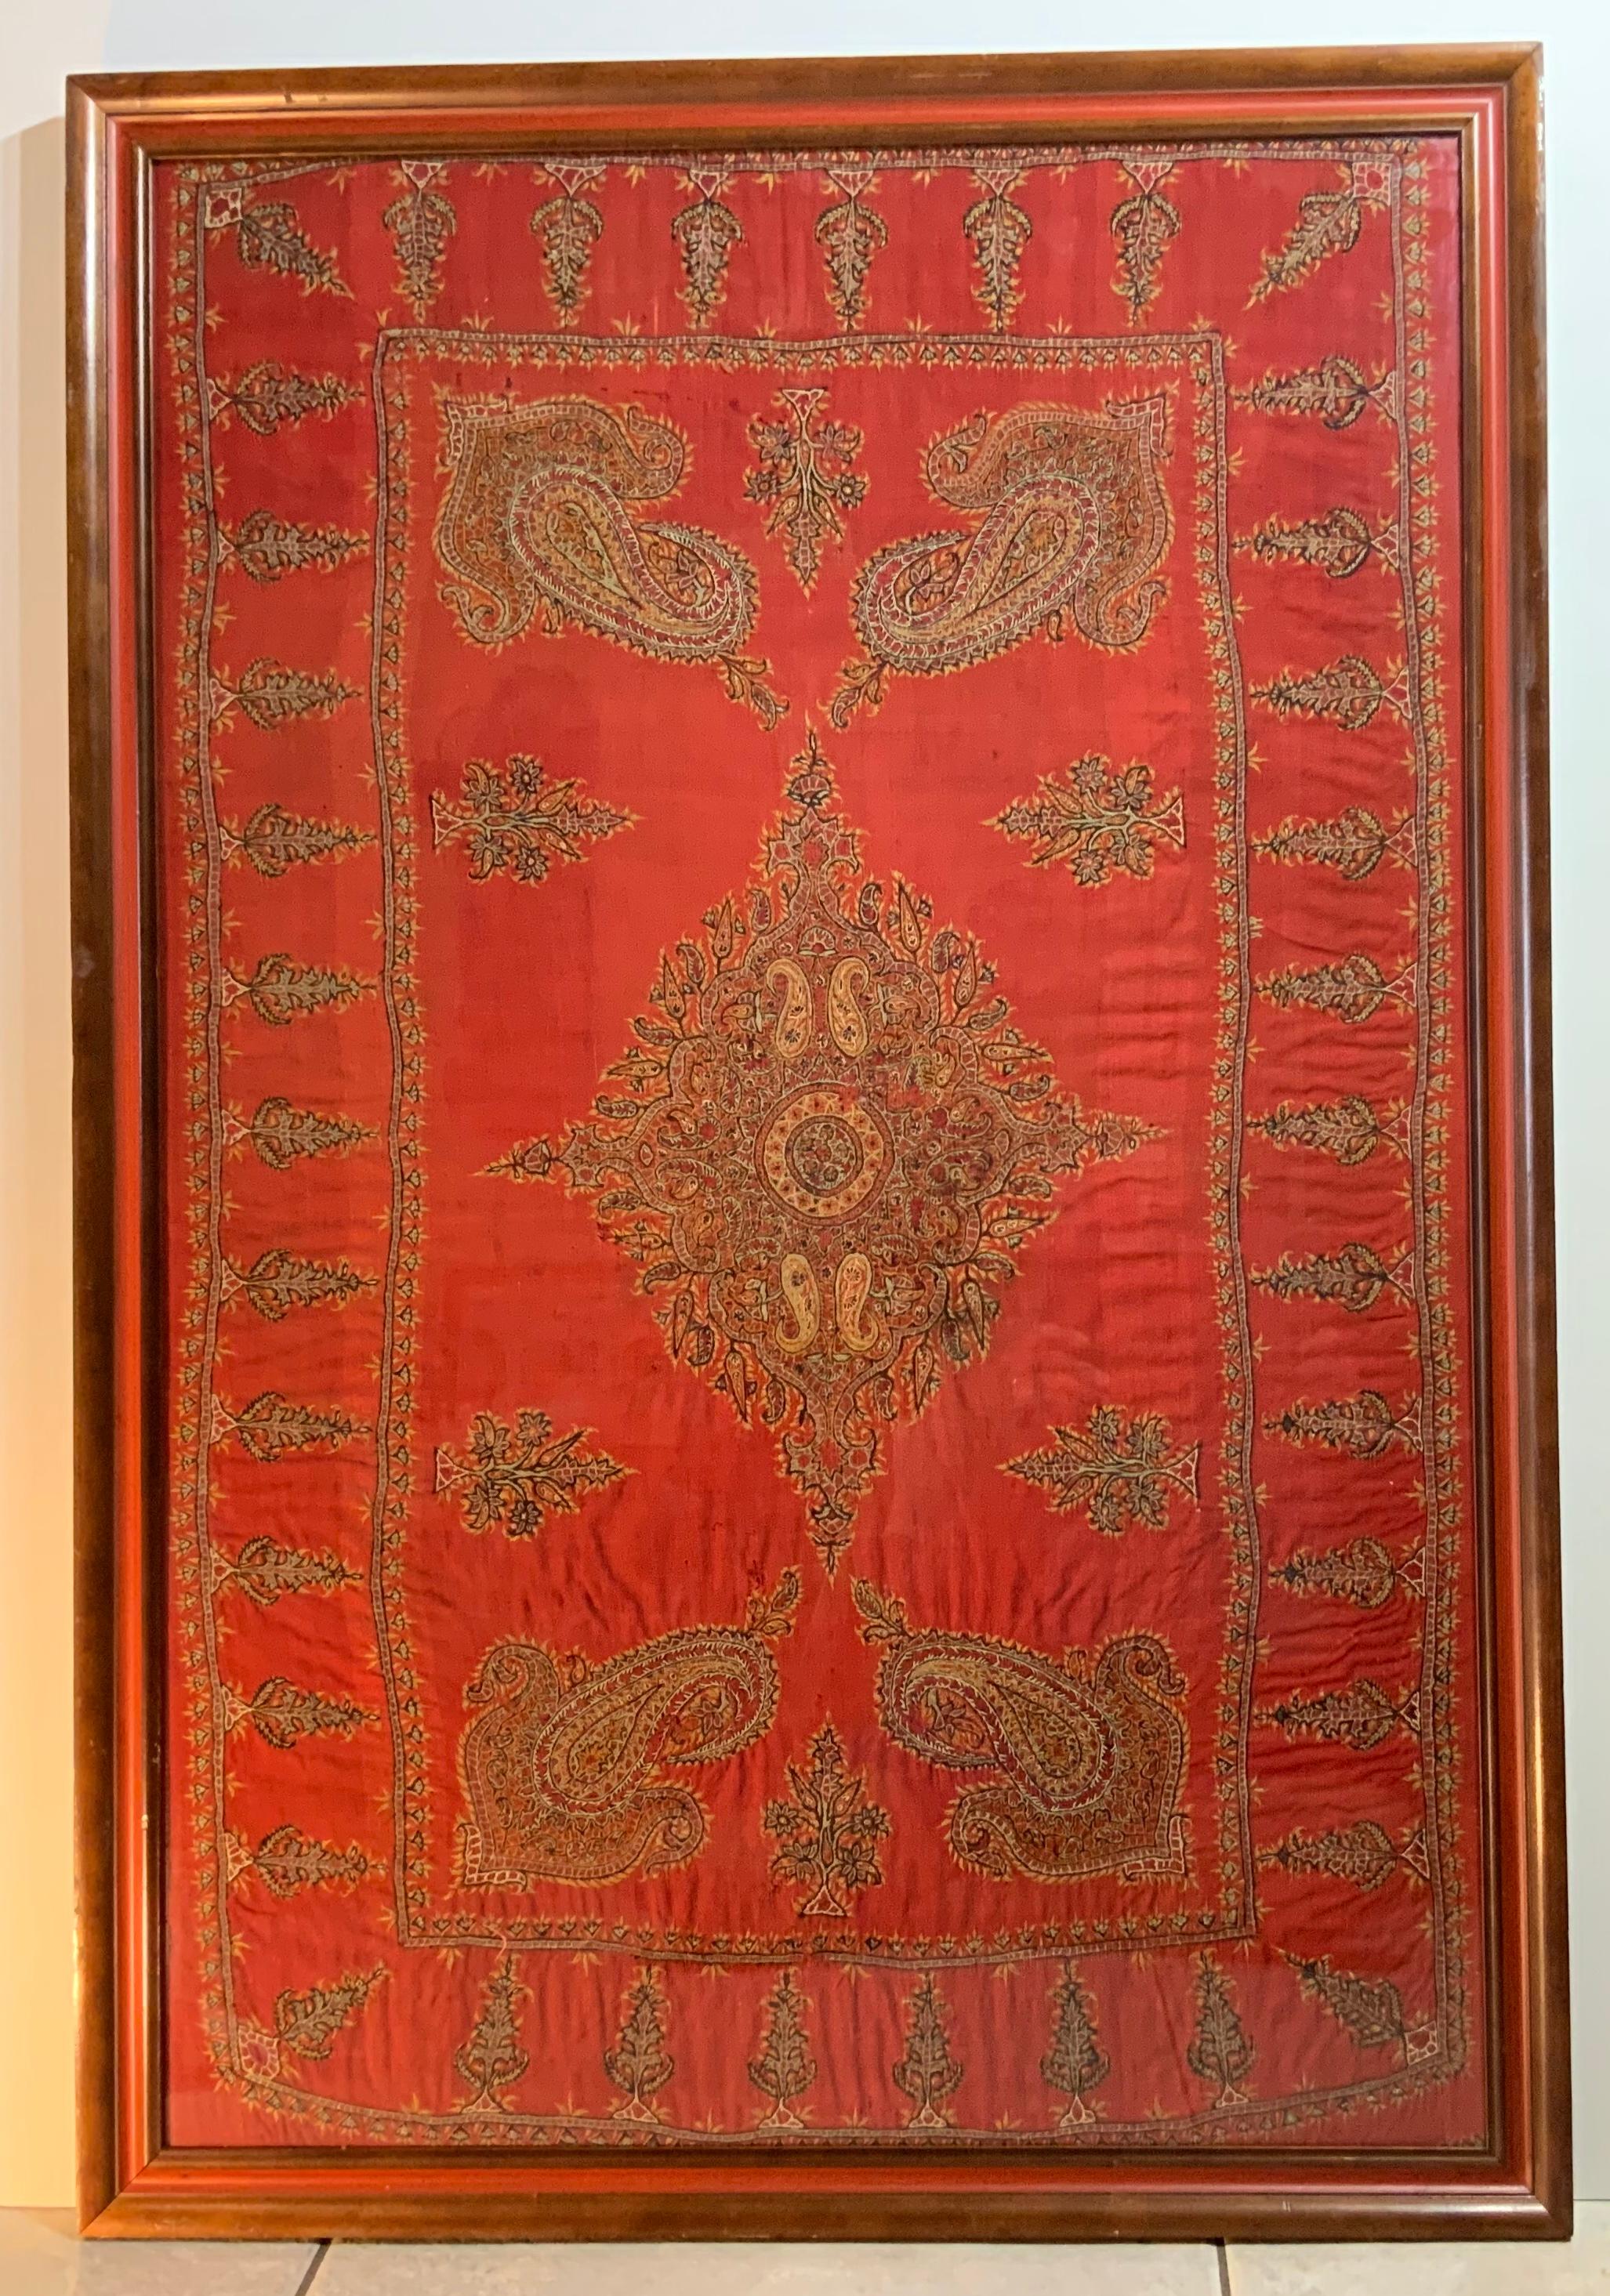 Early 20th Century Hand Embroidery Suzani Wall Hanging 14